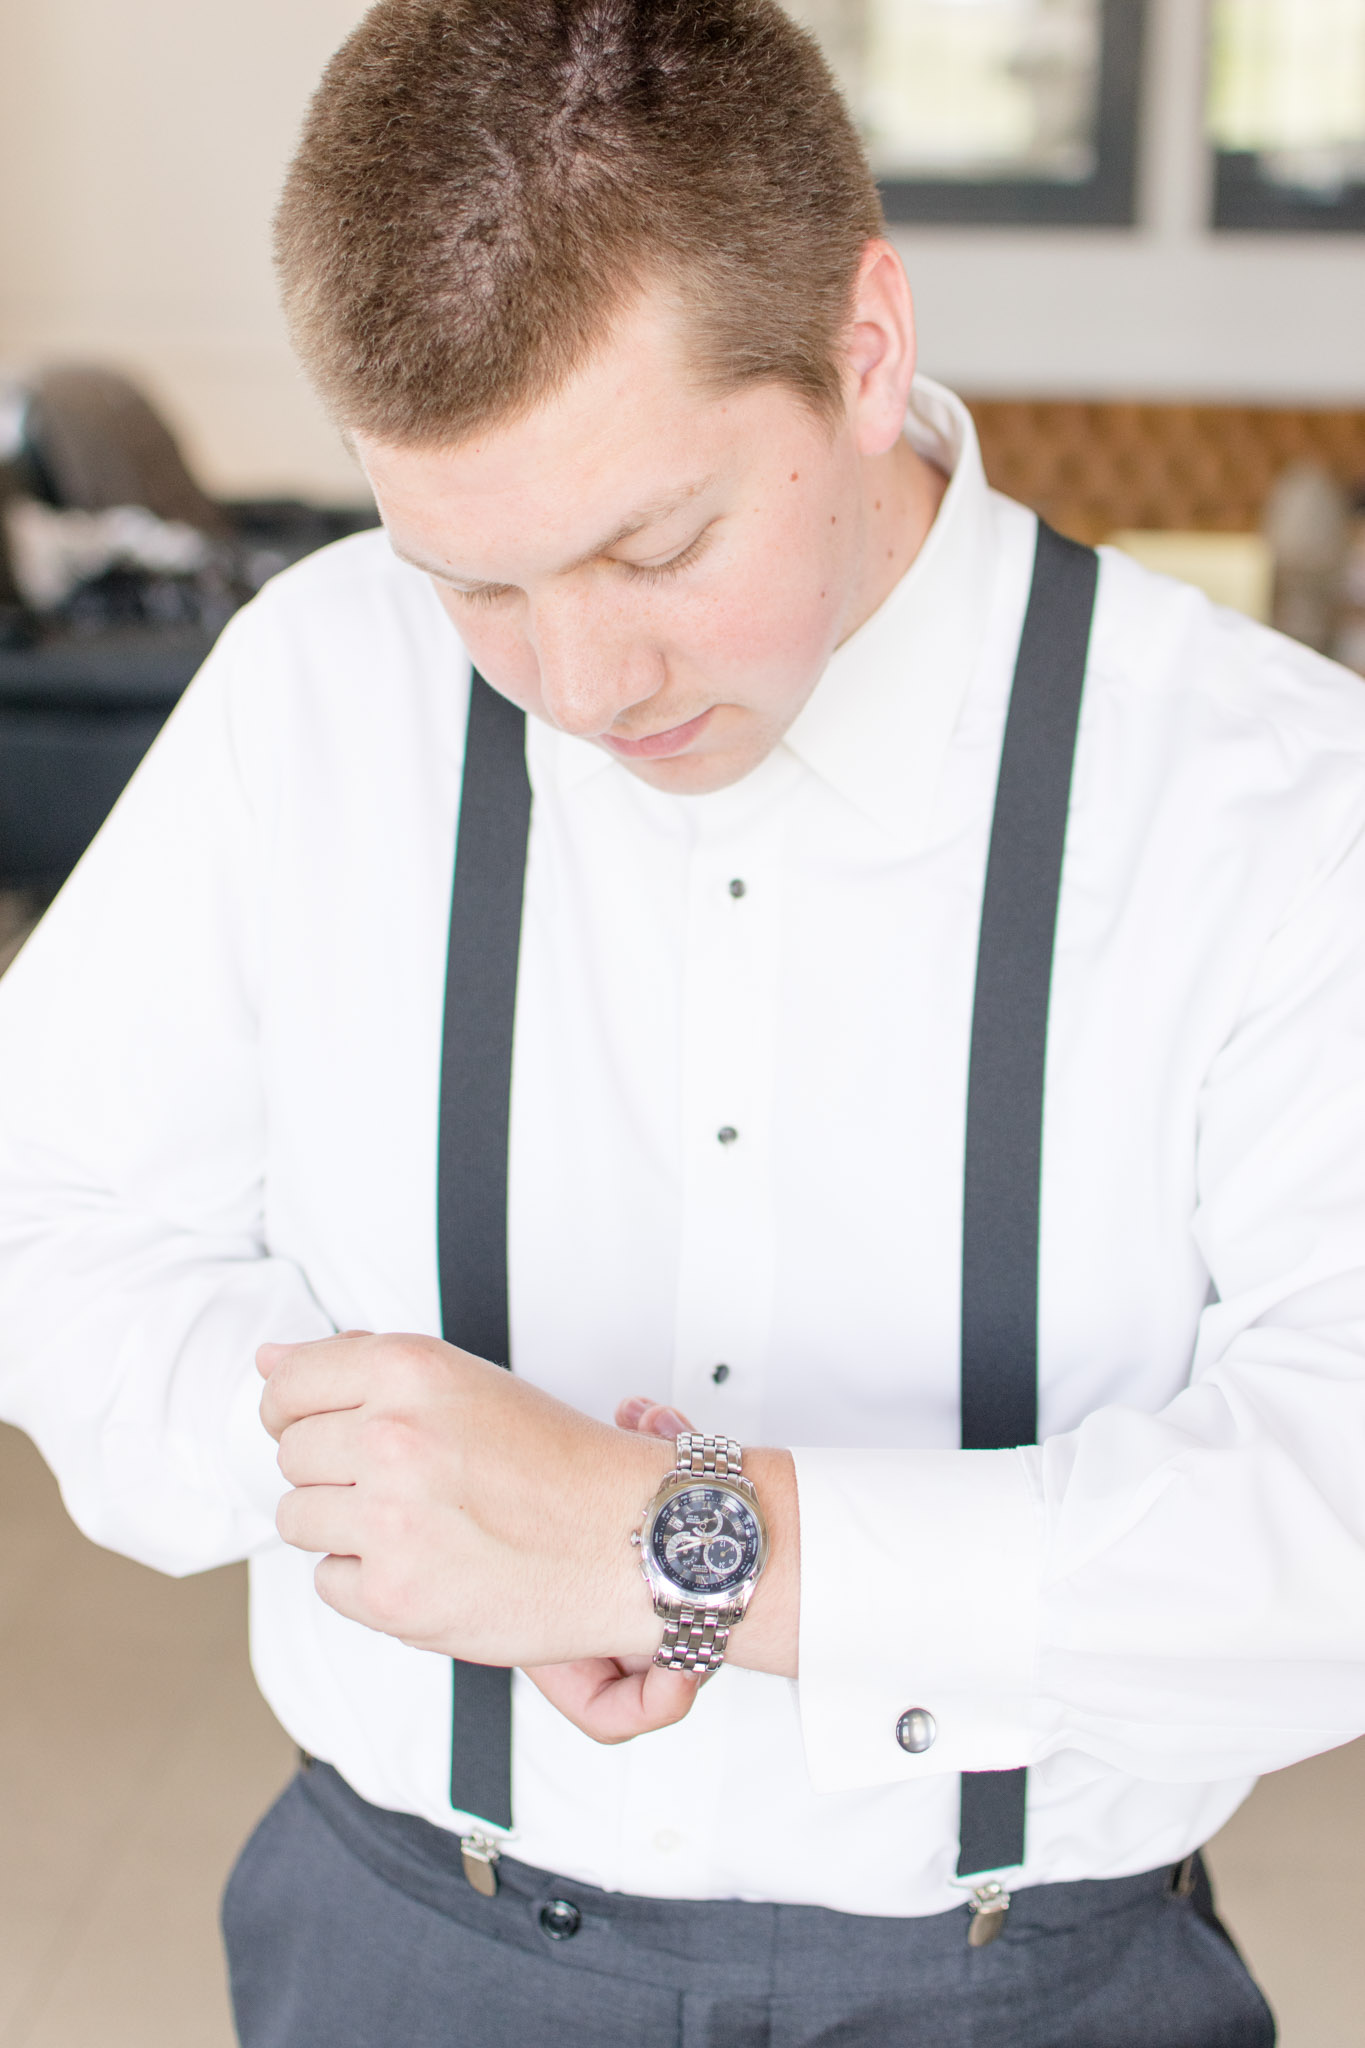 Groom fastens watch while getting ready